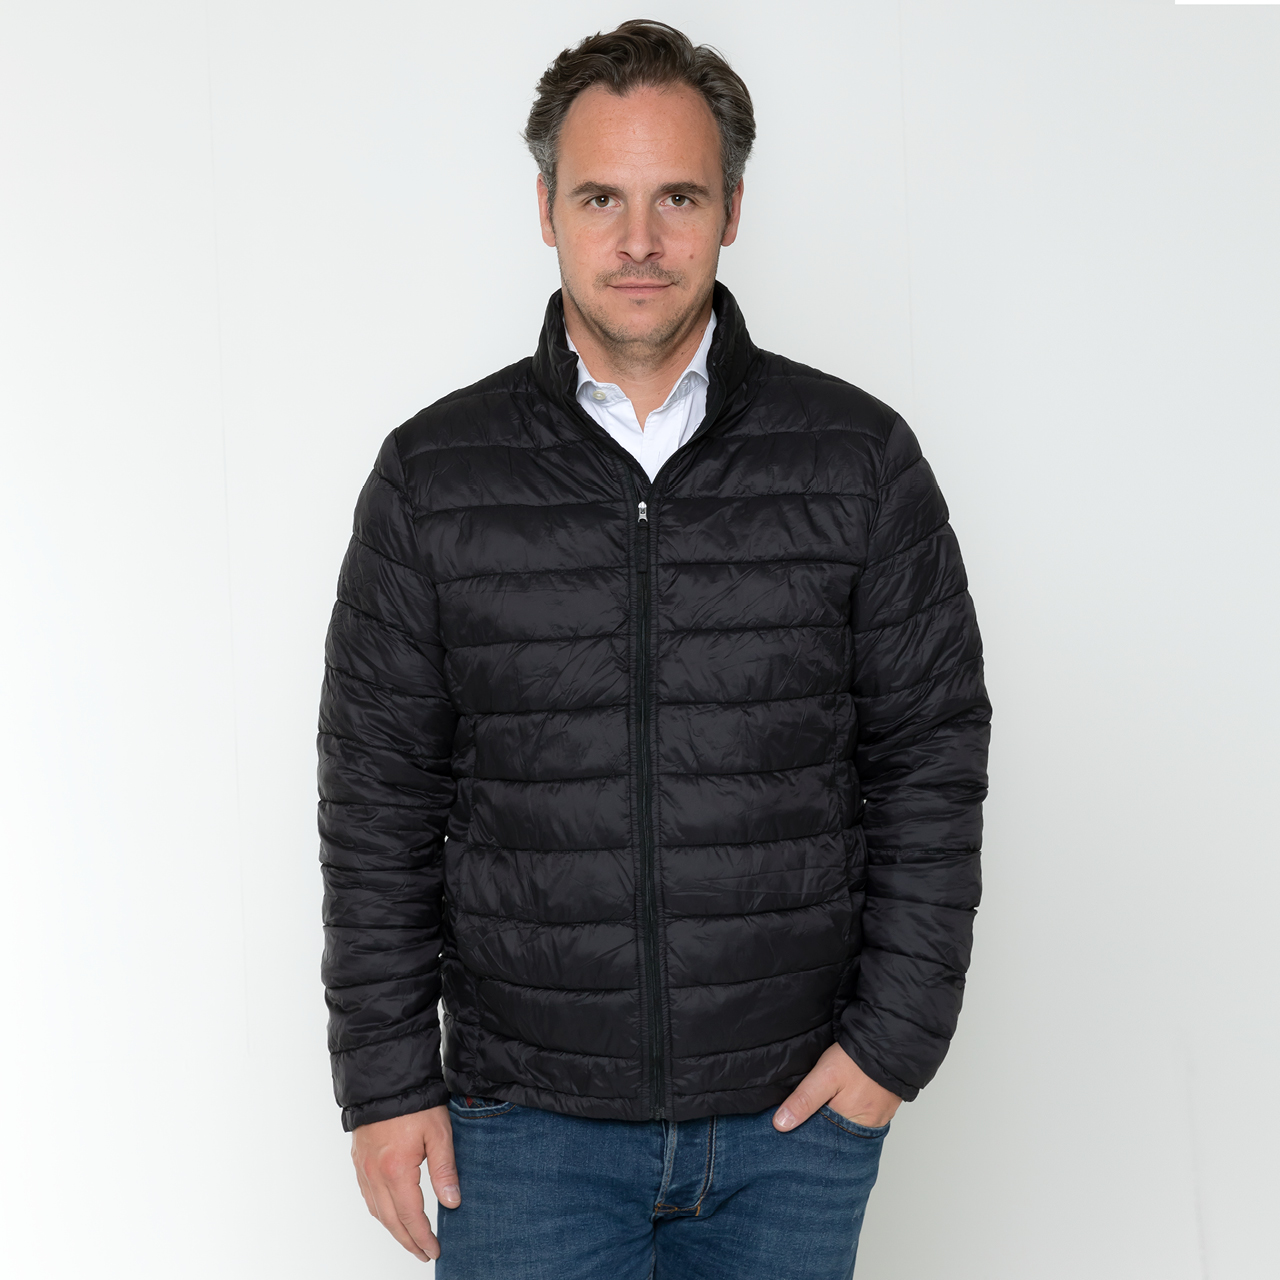 Quilted Jackets for men's in black L/XL